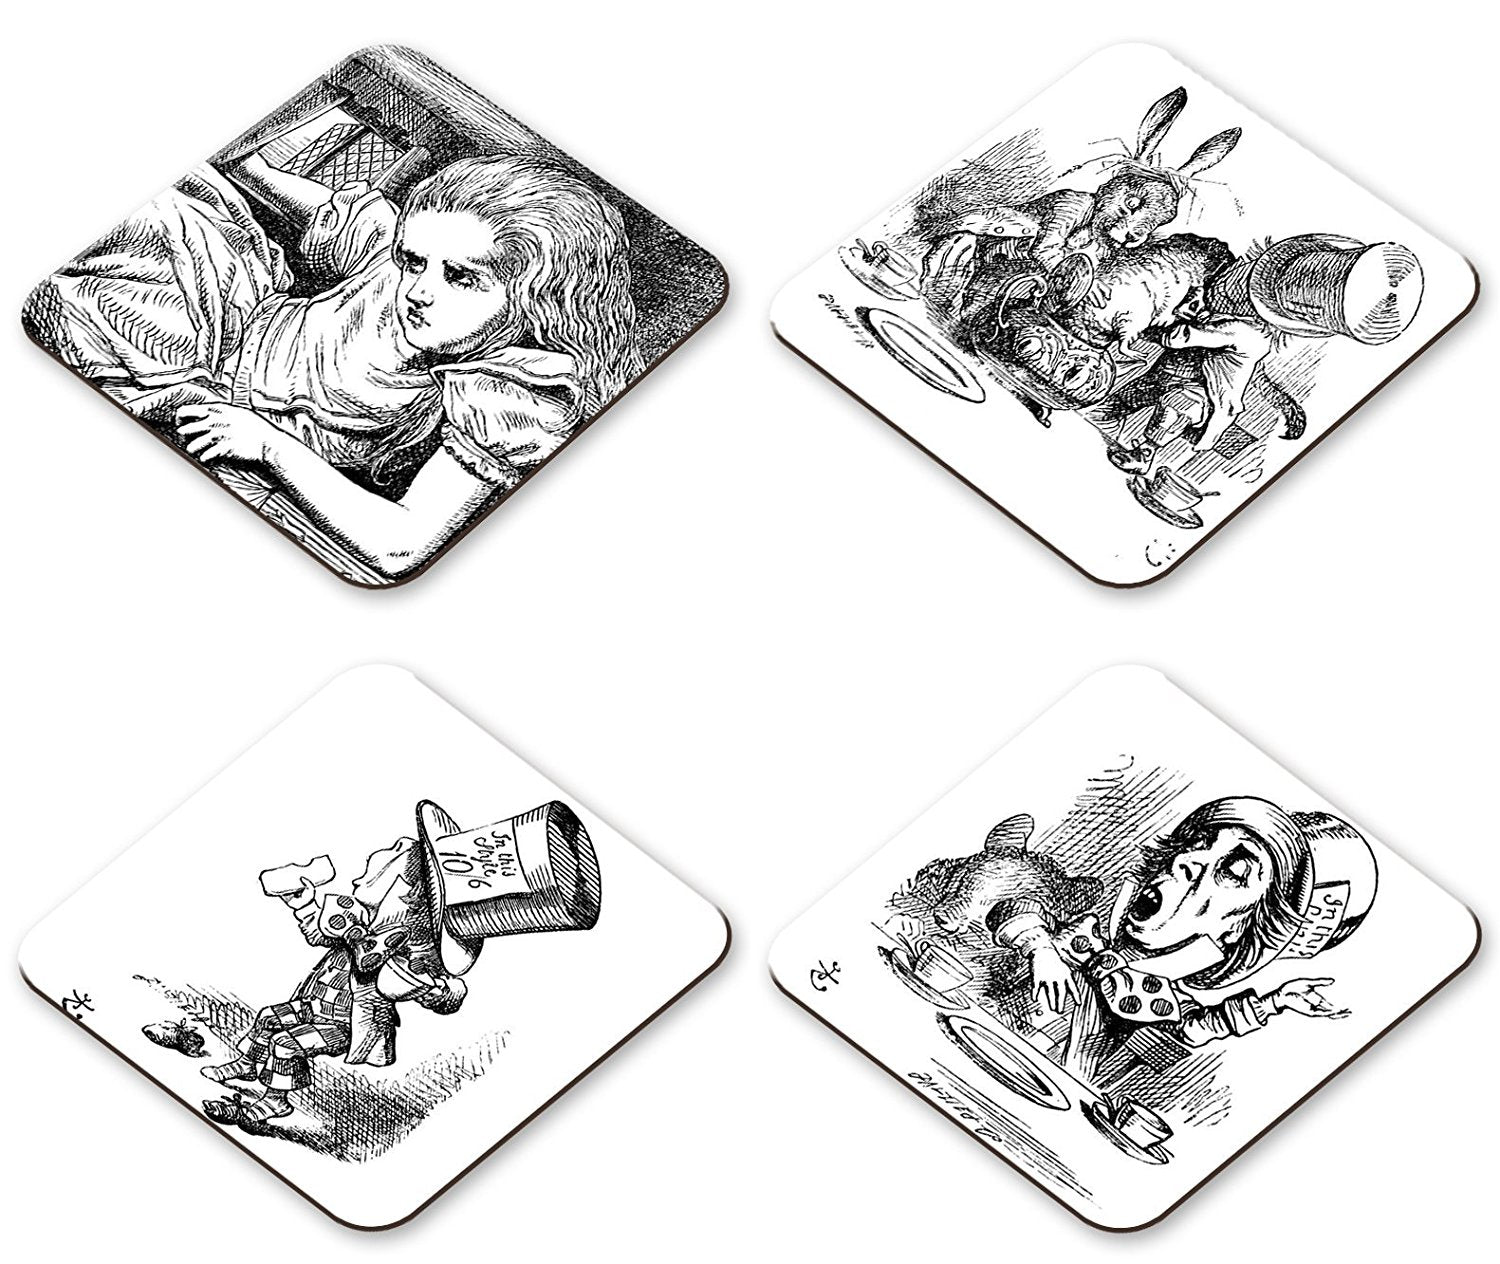 Alice in Wonderland Set of 4 Coasters - Shrunk, Tea Pot, The Mad Hatter, The Mad Hatter's Table